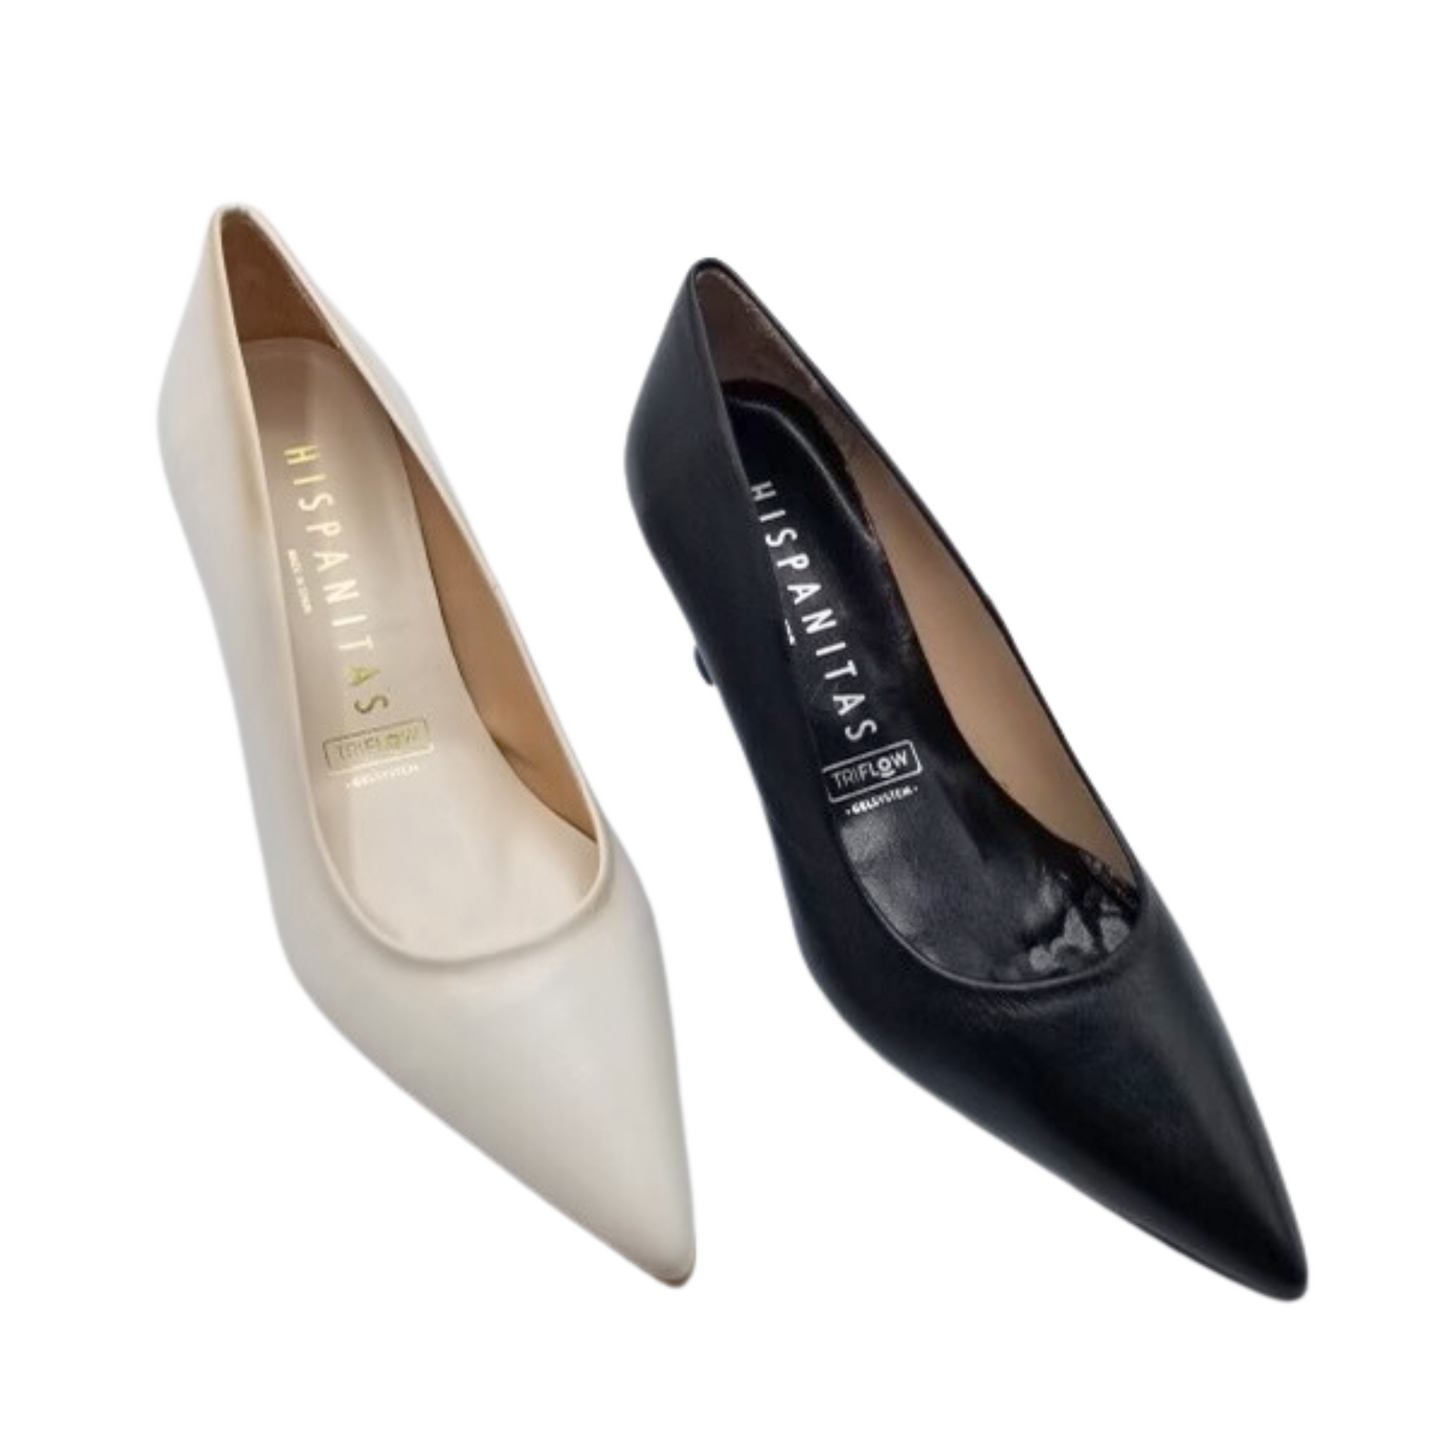 Angled front view of a classic pump with a pointed toe.  Shown in a creamy white and black